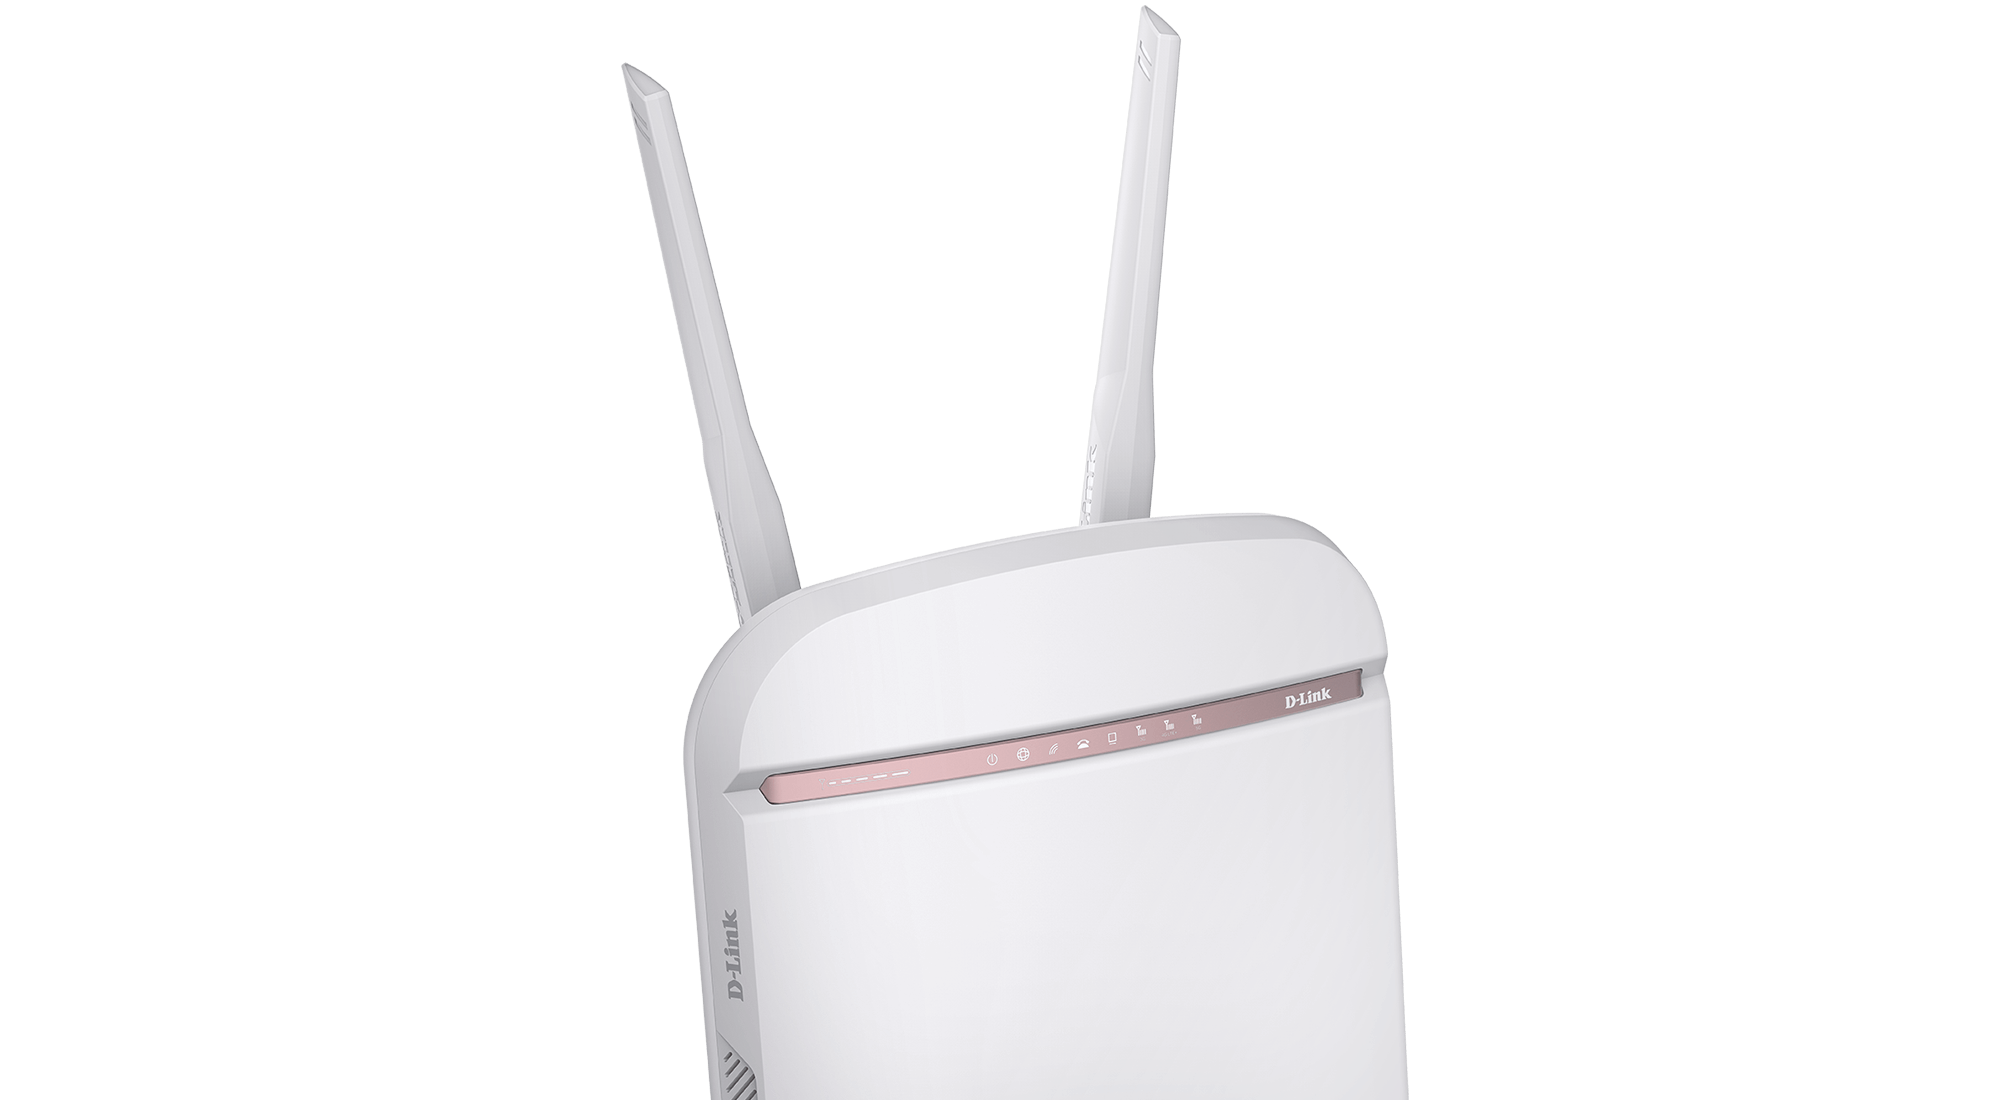 DWR-978 5G AC2600 Wi-Fi Router - front view